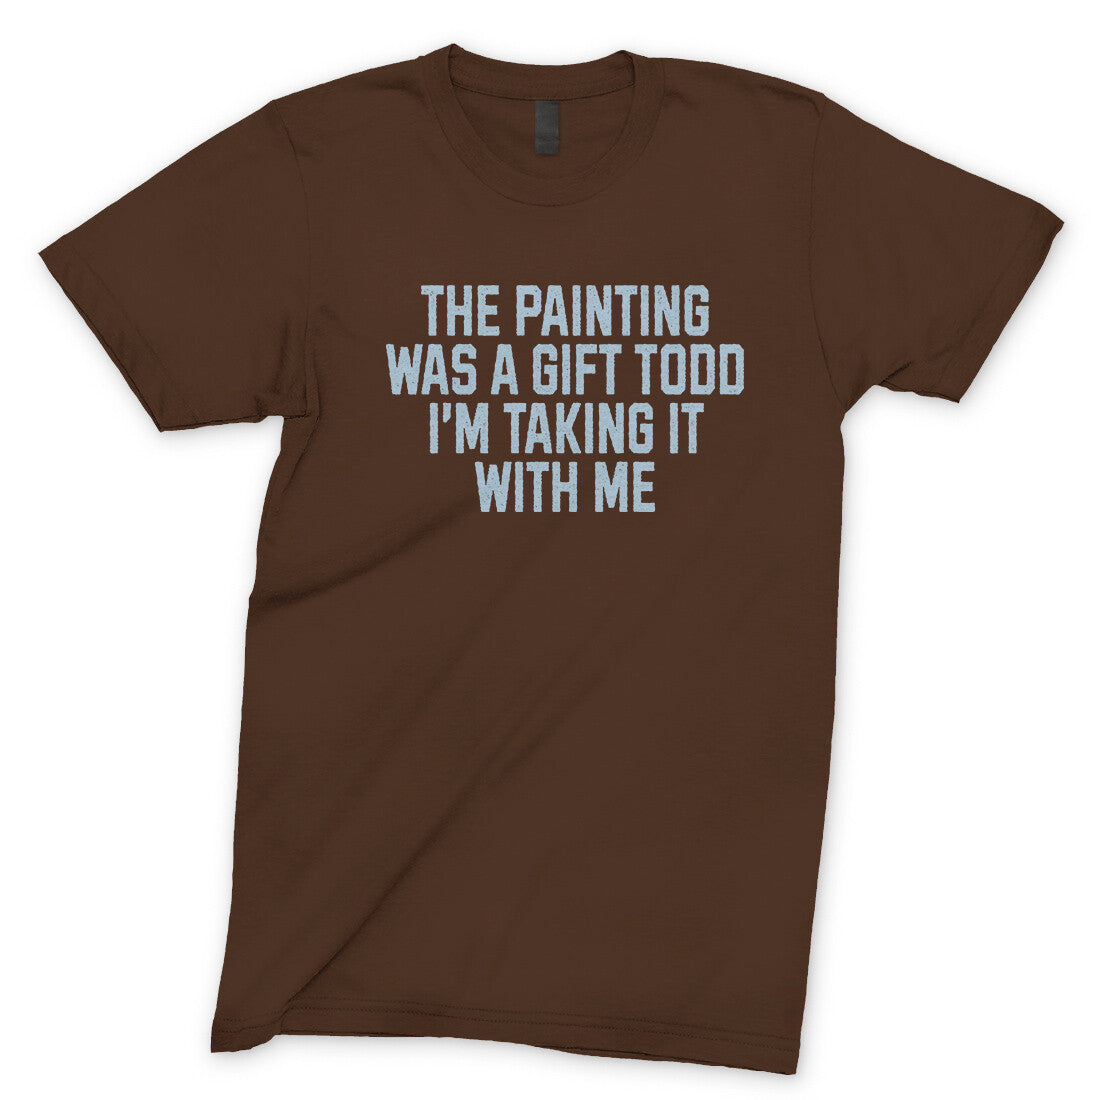 The Painting was a Gift Todd I'm Taking it With Me in Dark Chocolate Color